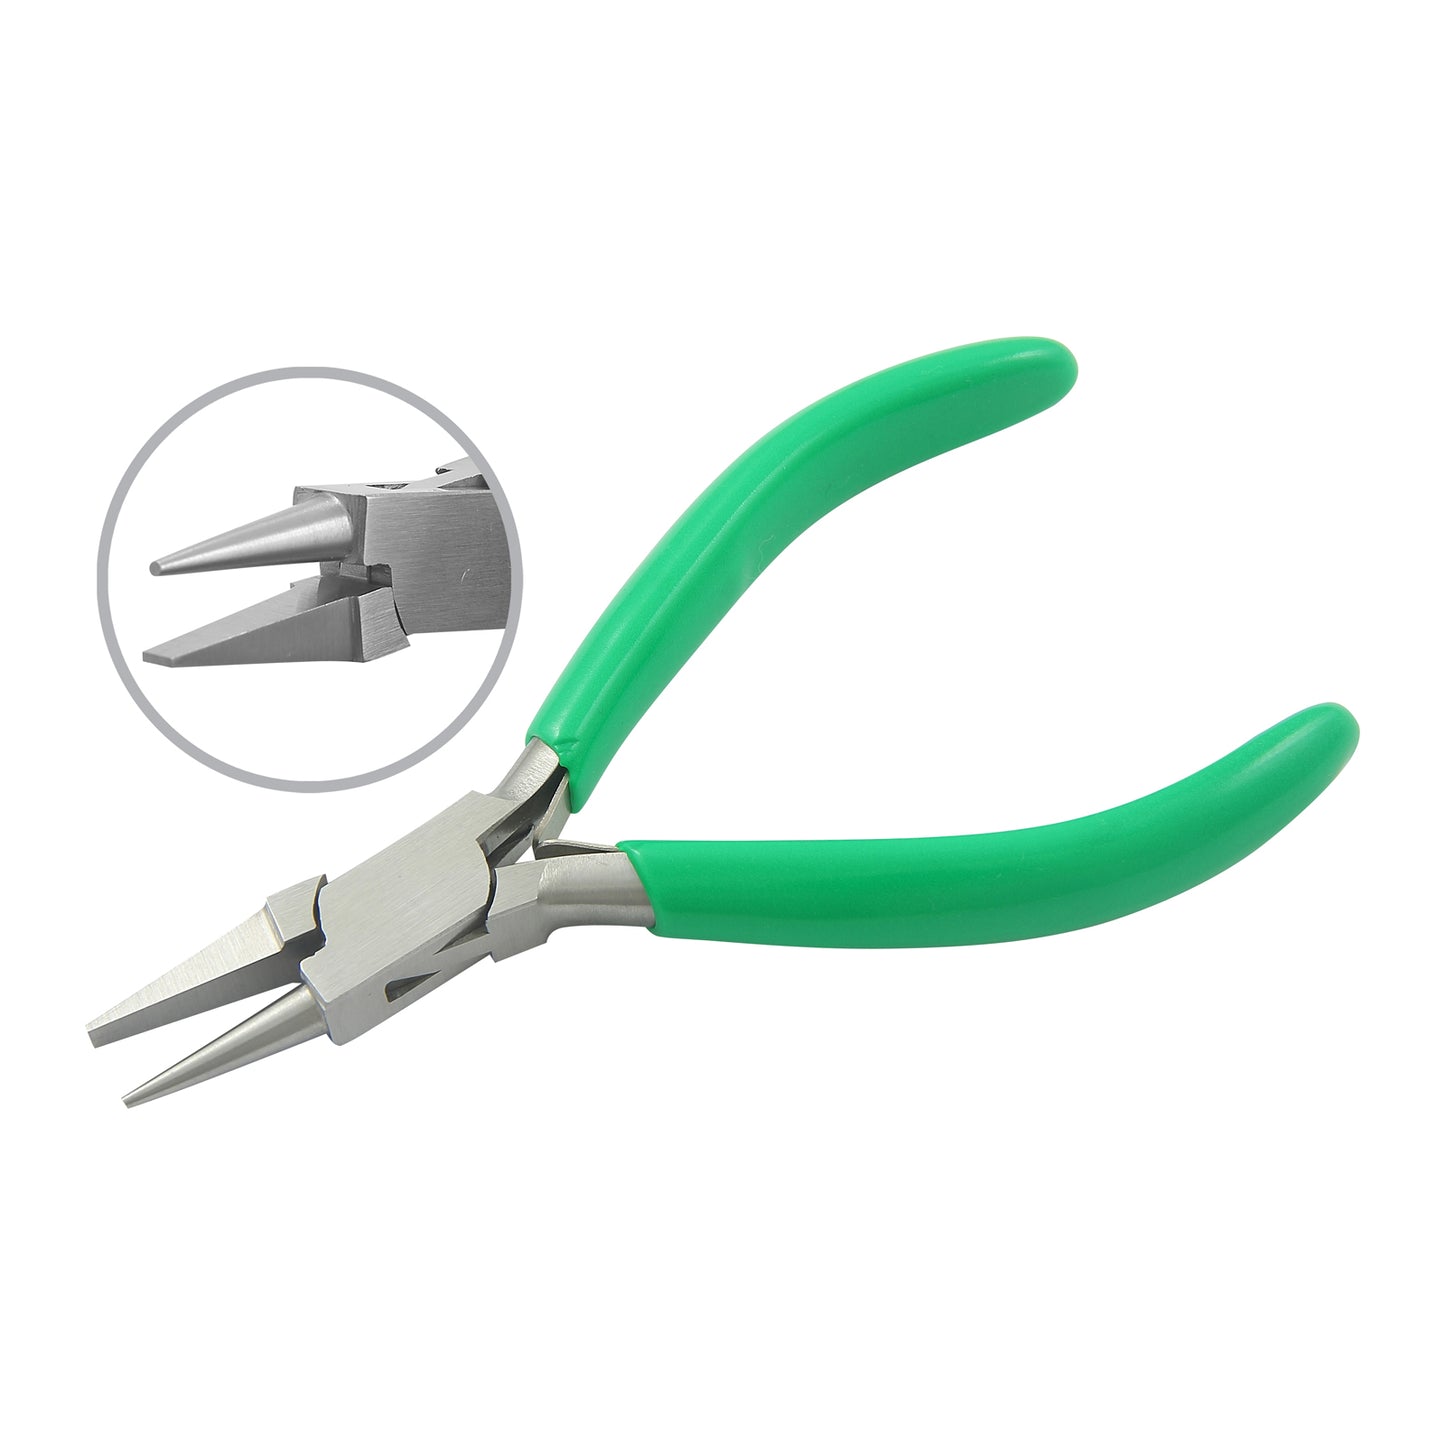 Round & flat plier, size: 130mm with double leaf spring & PVC handles